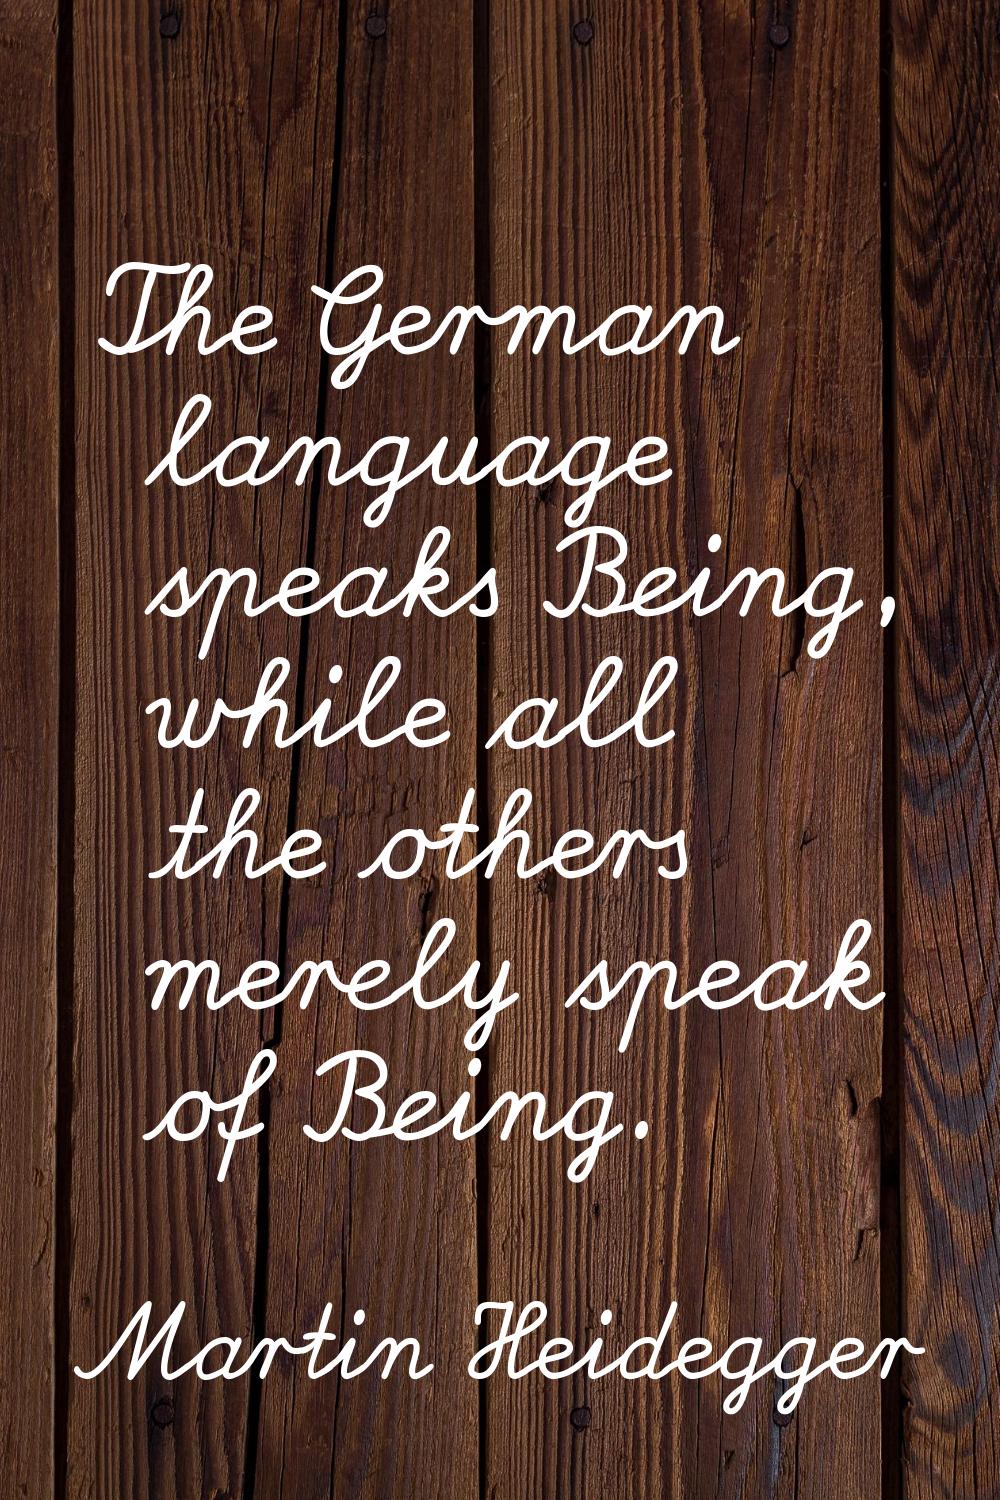 The German language speaks Being, while all the others merely speak of Being.